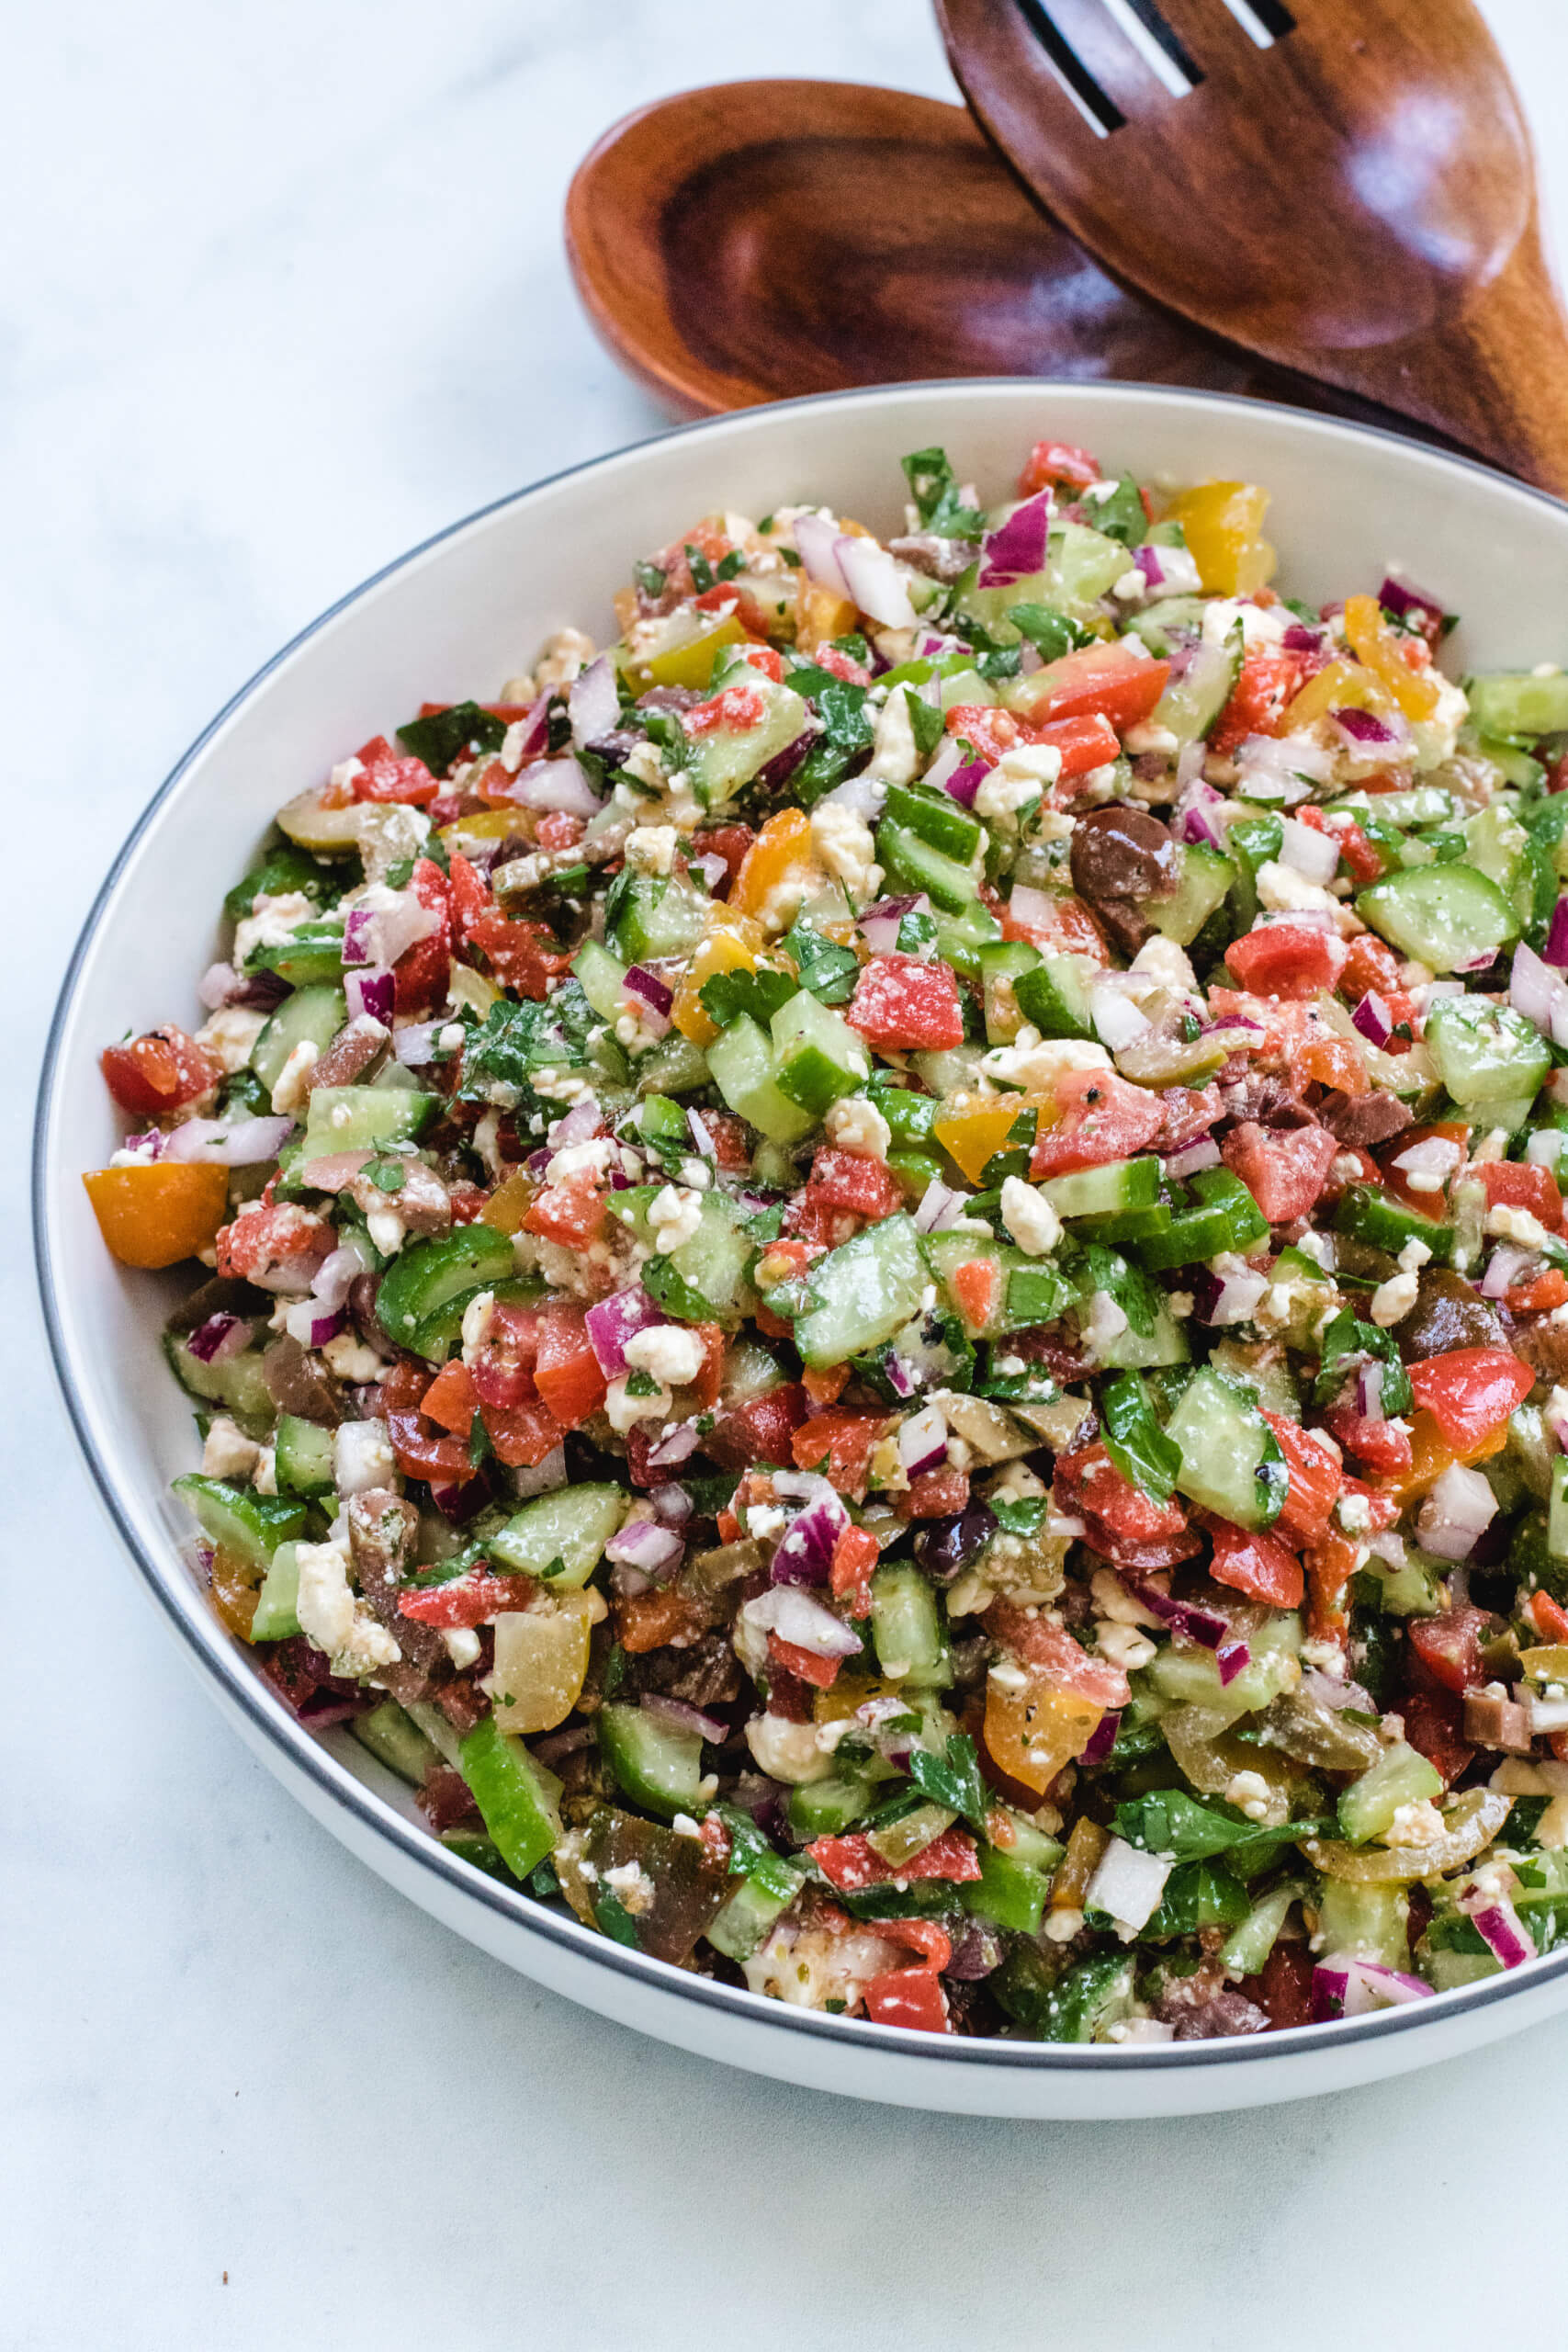 Mediterranean chopped salad in a large salad bowl with wooden spoons beside it